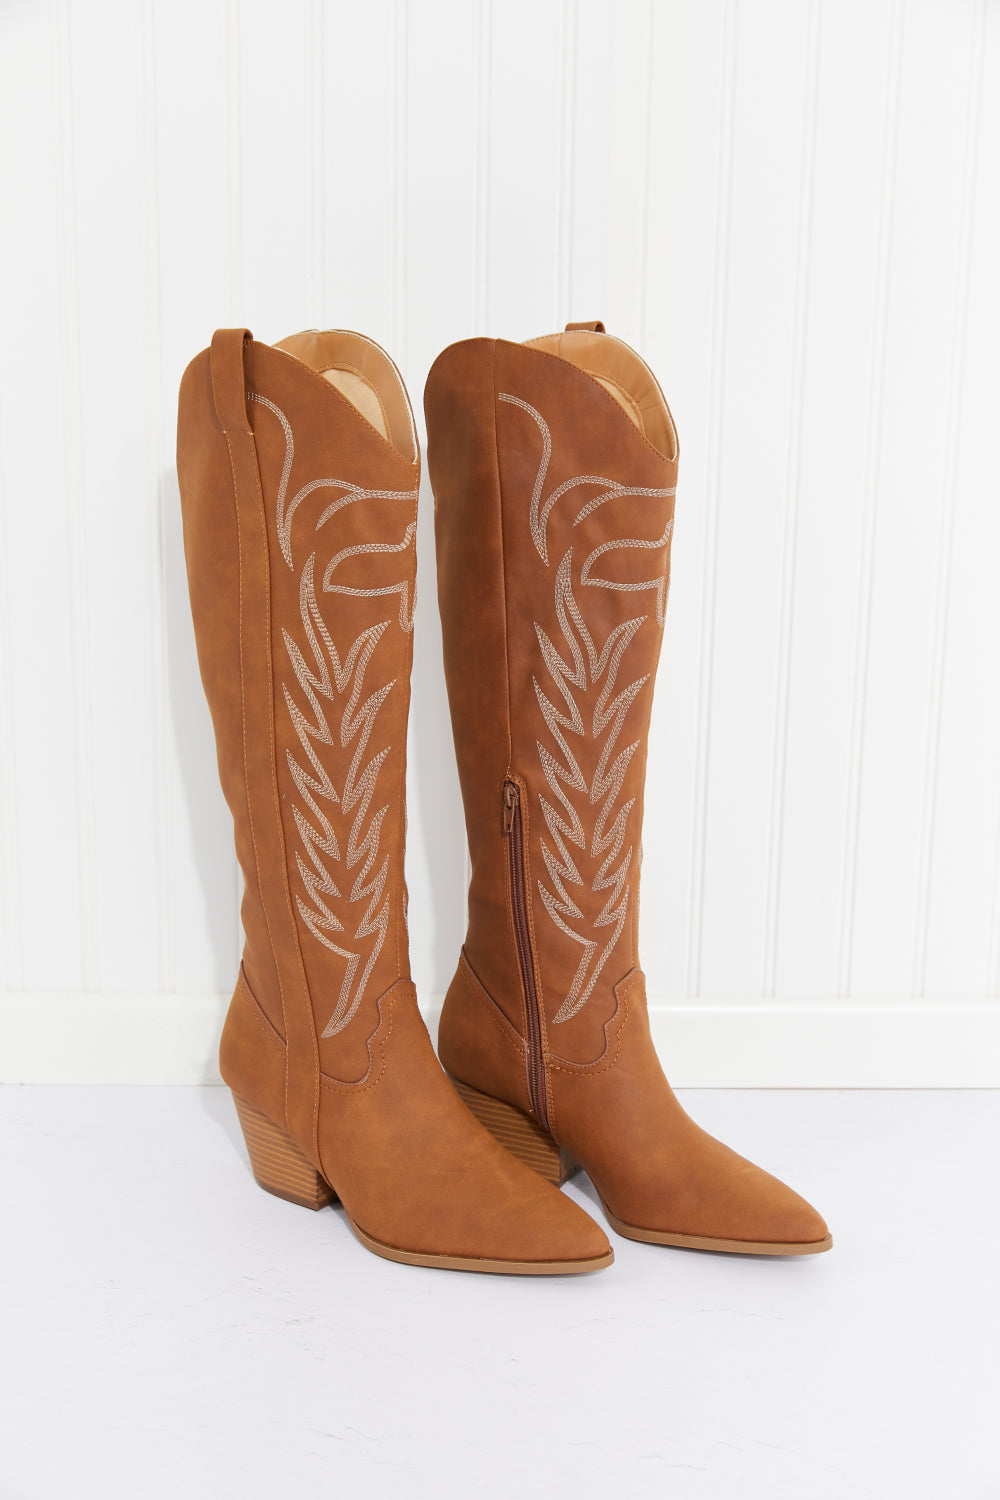 Qupid Cheyenne Nights Embroidered Knee High Cowboy Boots